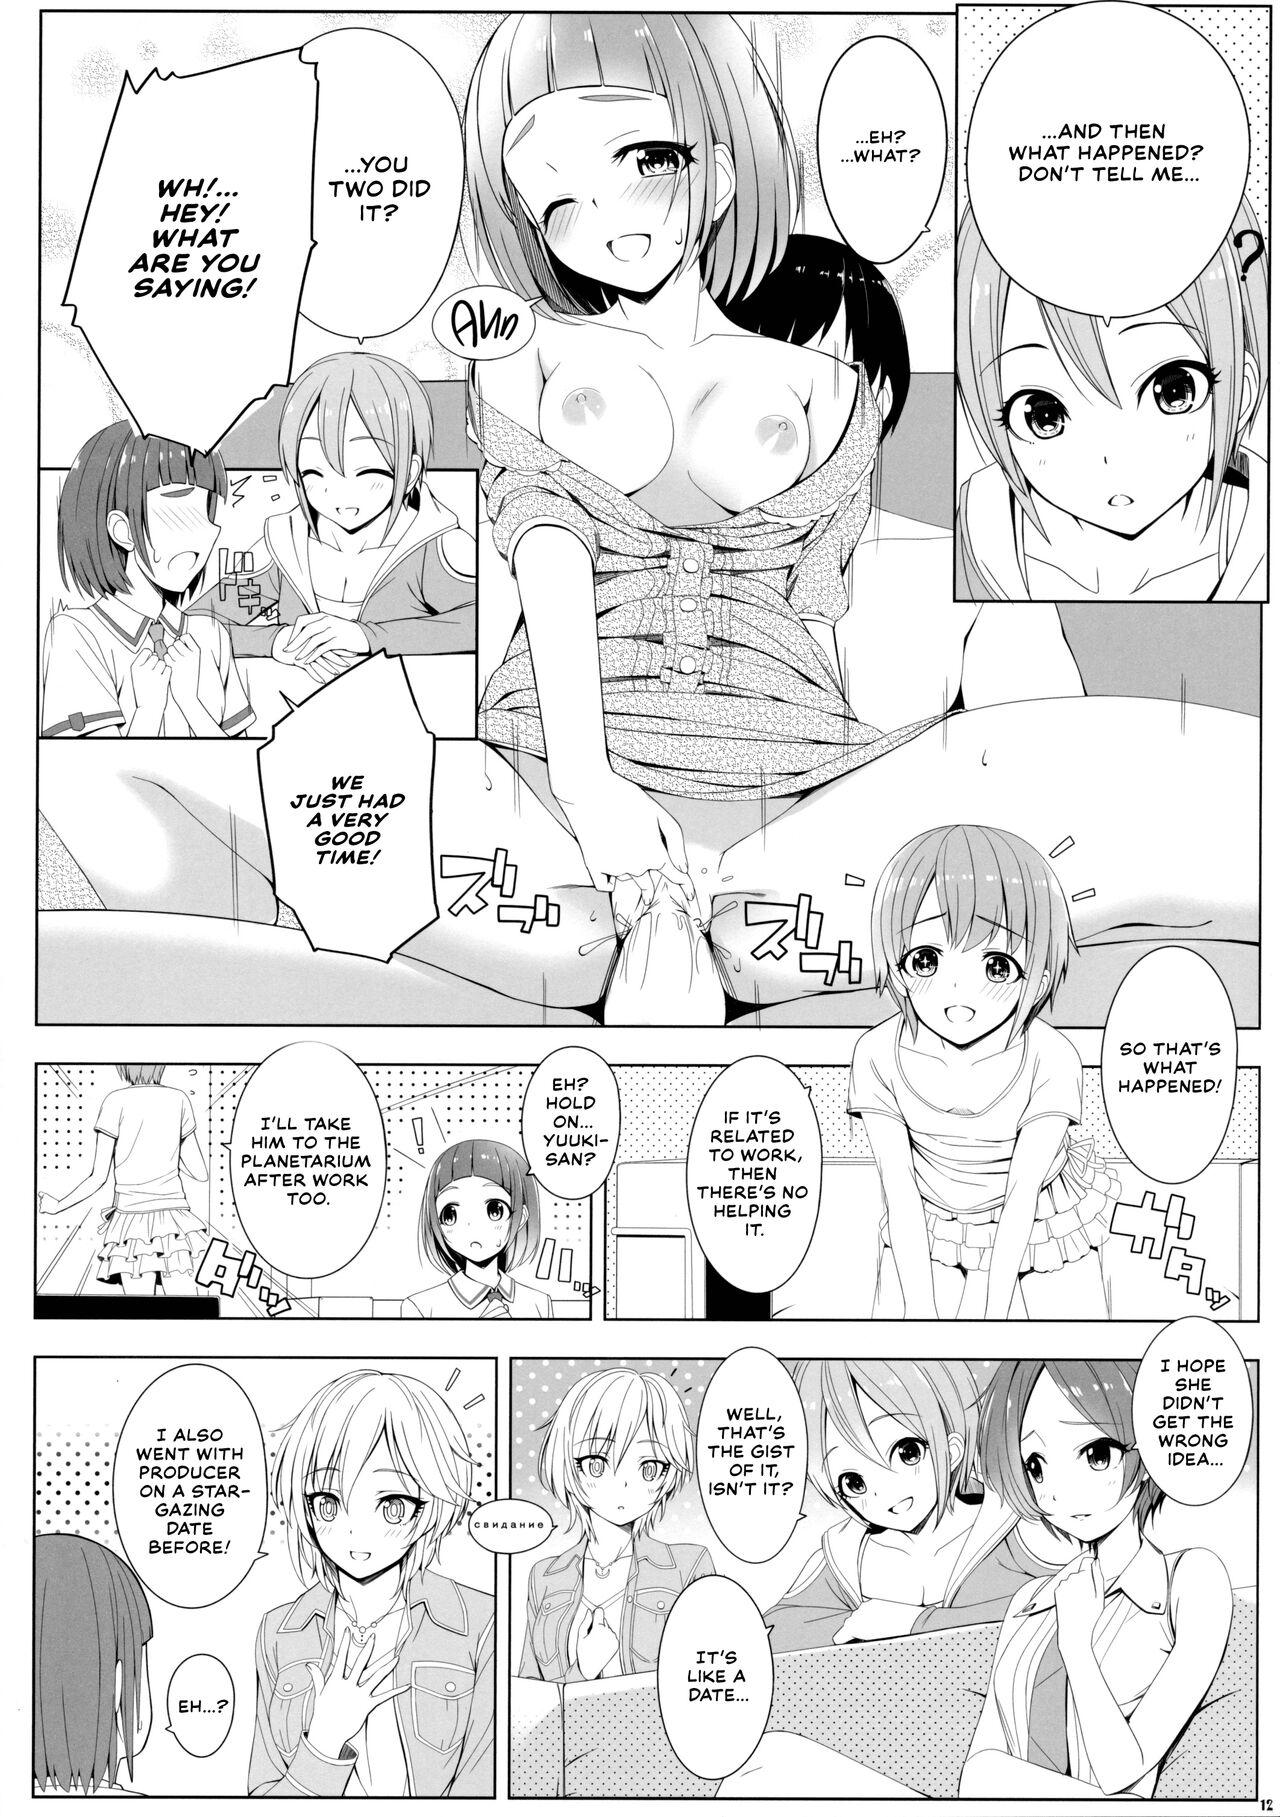 Tributo SESSION - The idolmaster Calle - Page 11